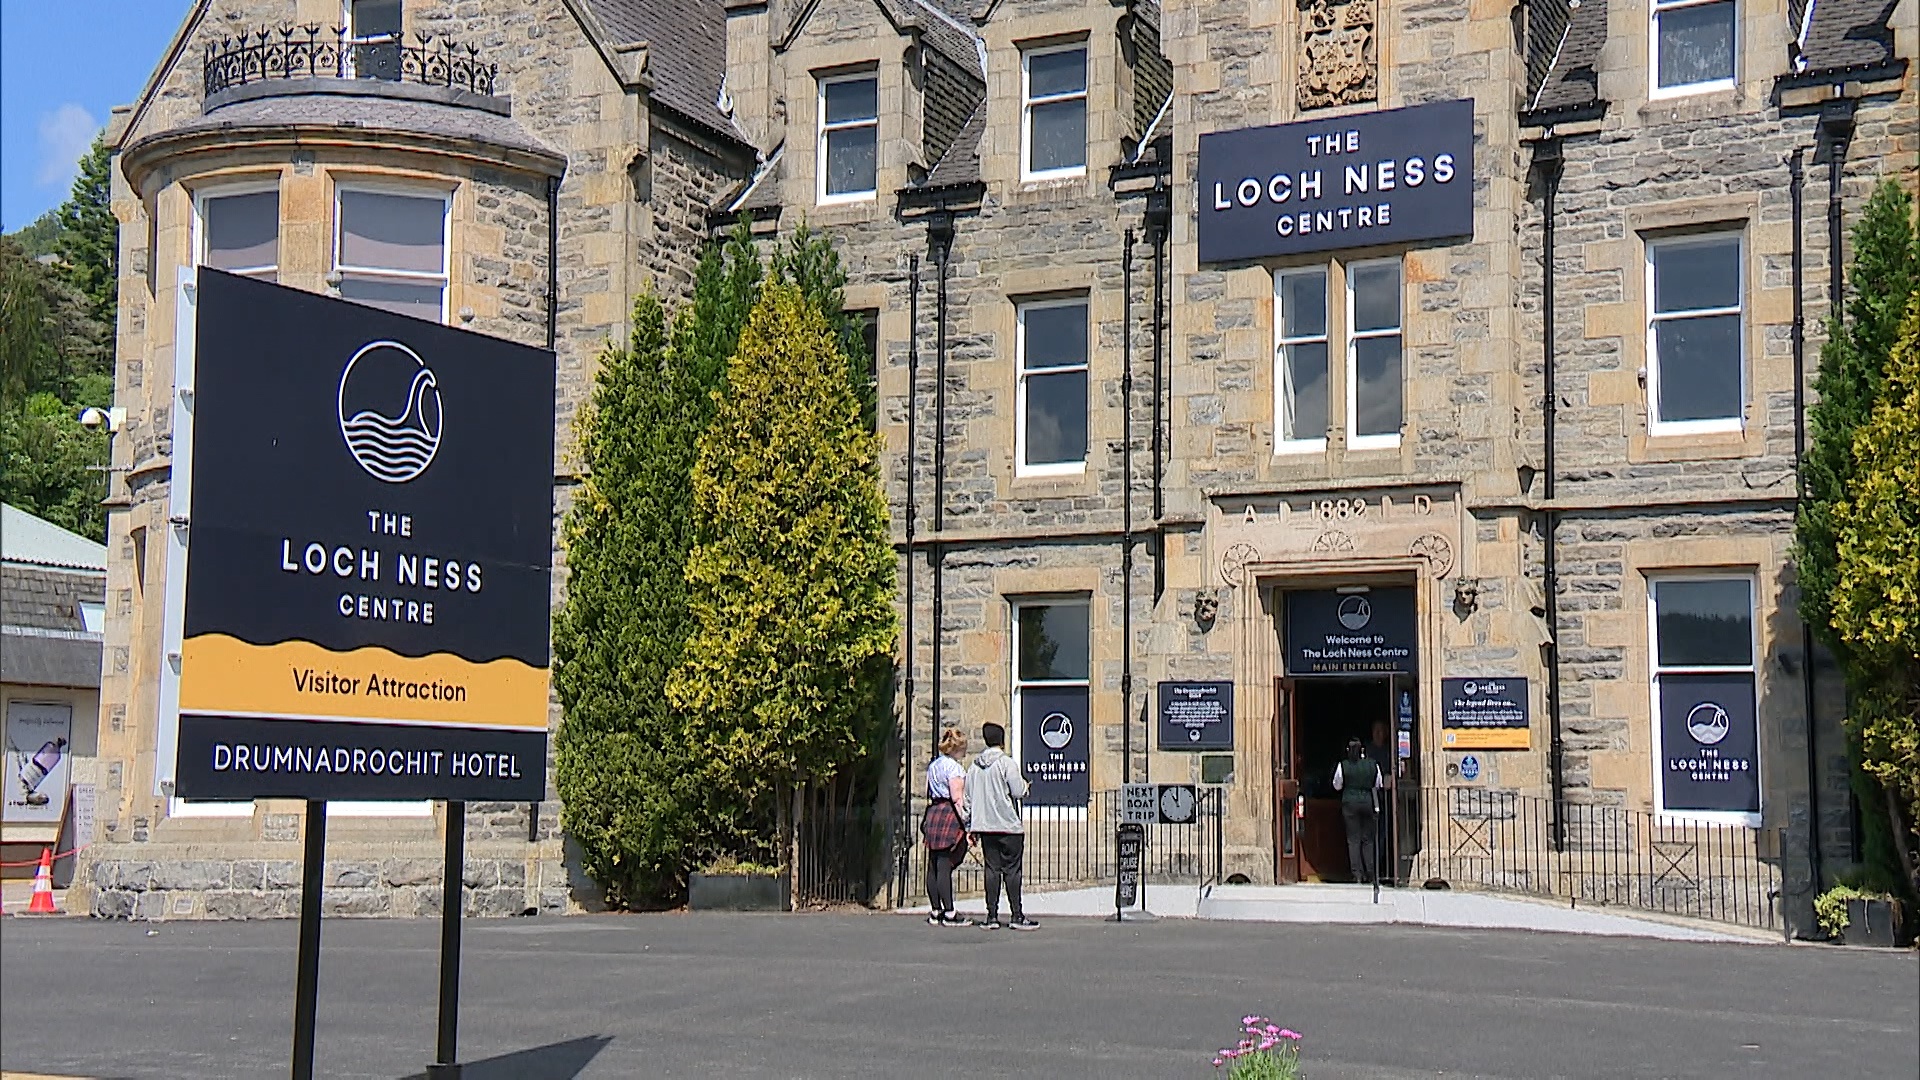 £1.5m has been spent on the new experience at the Loch Ness Visitor Centre, set to open its doors to the public this weekend after a major refurbishment. 